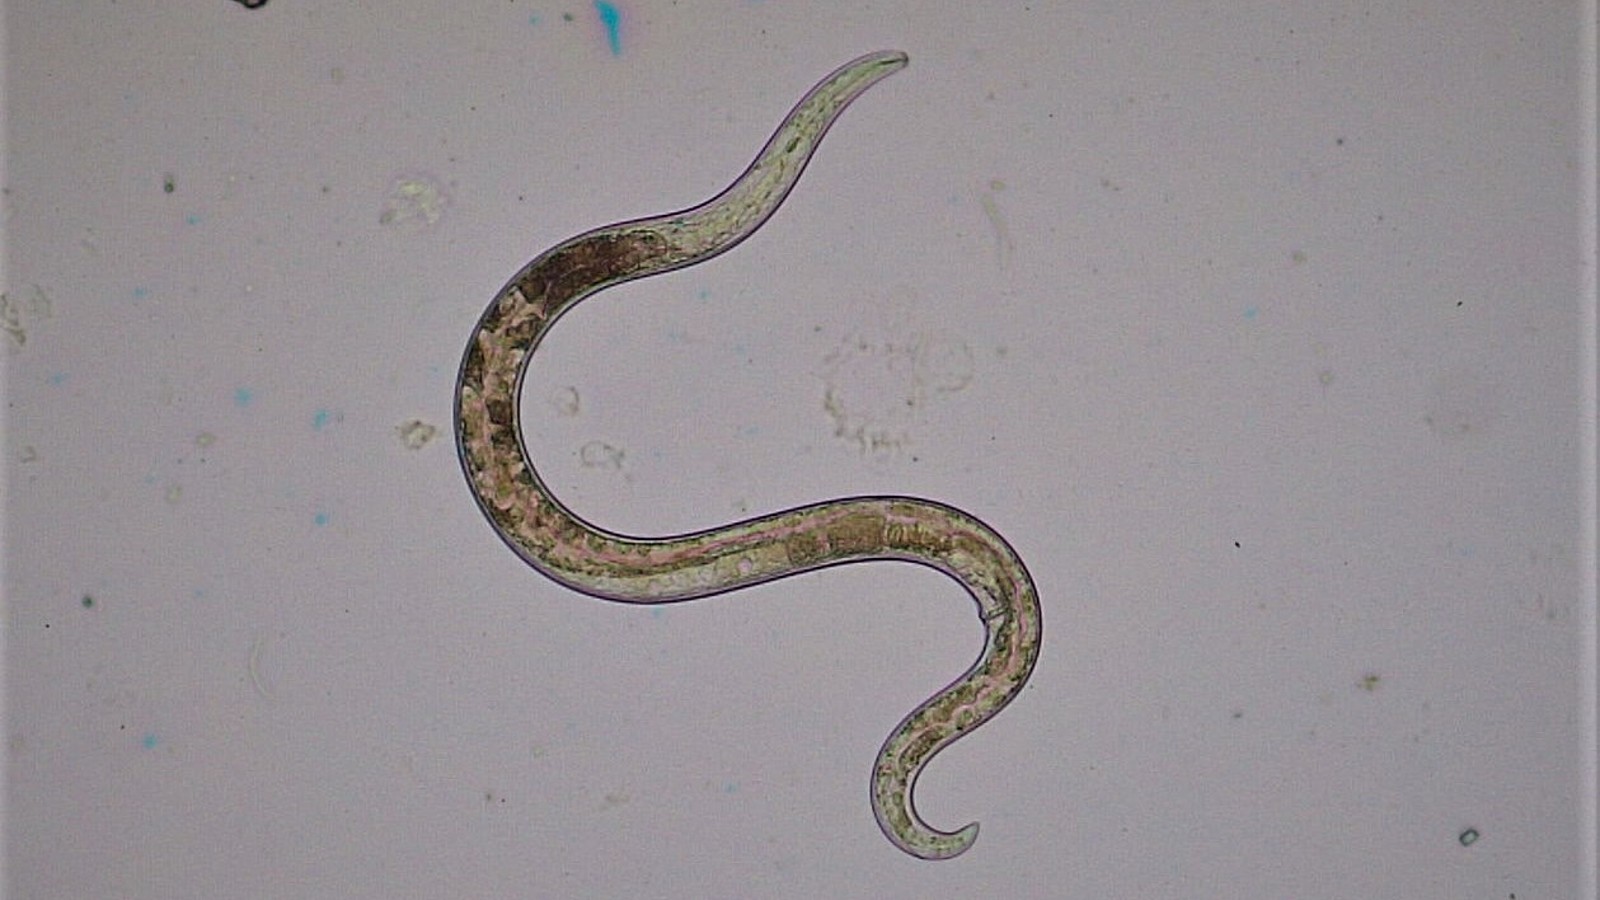 An image of a small worm on a white surface.